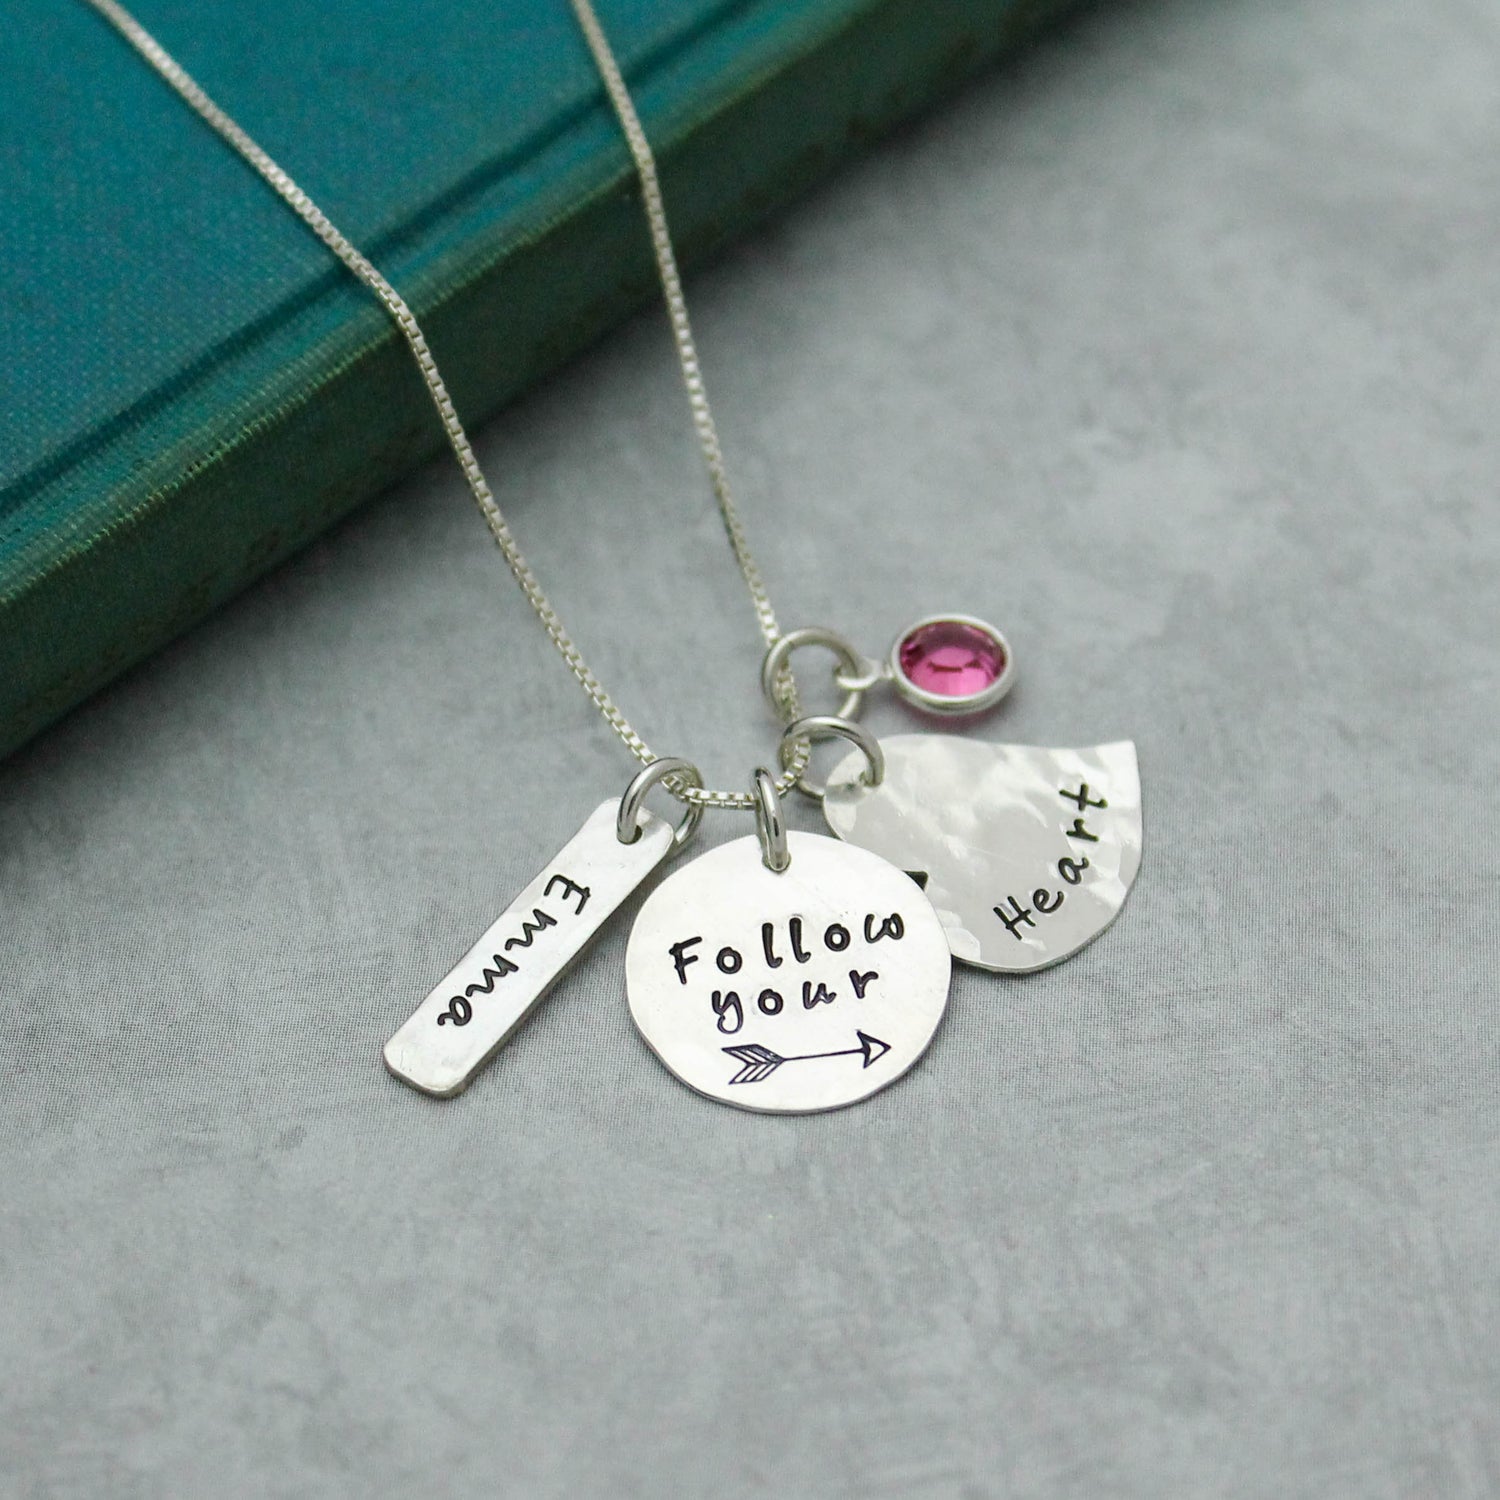 Follow Your Heart Necklace Graduation Gift, Personalized Grad Necklace, Follow Your Arrow Custom Graduation Jewelry, Graduation Gift for Her